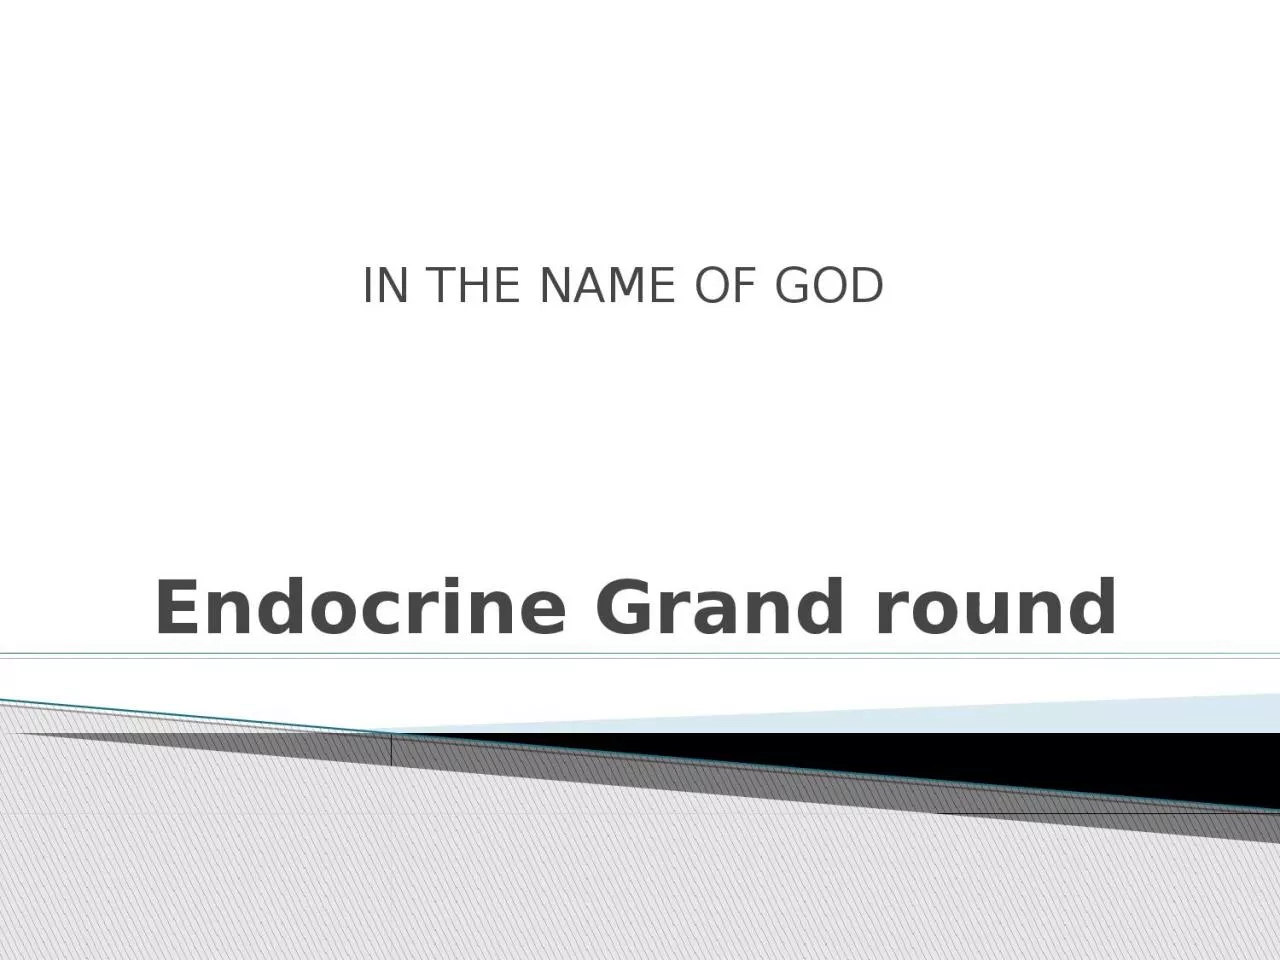 Endocrine Grand round IN THE NAME OF GOD